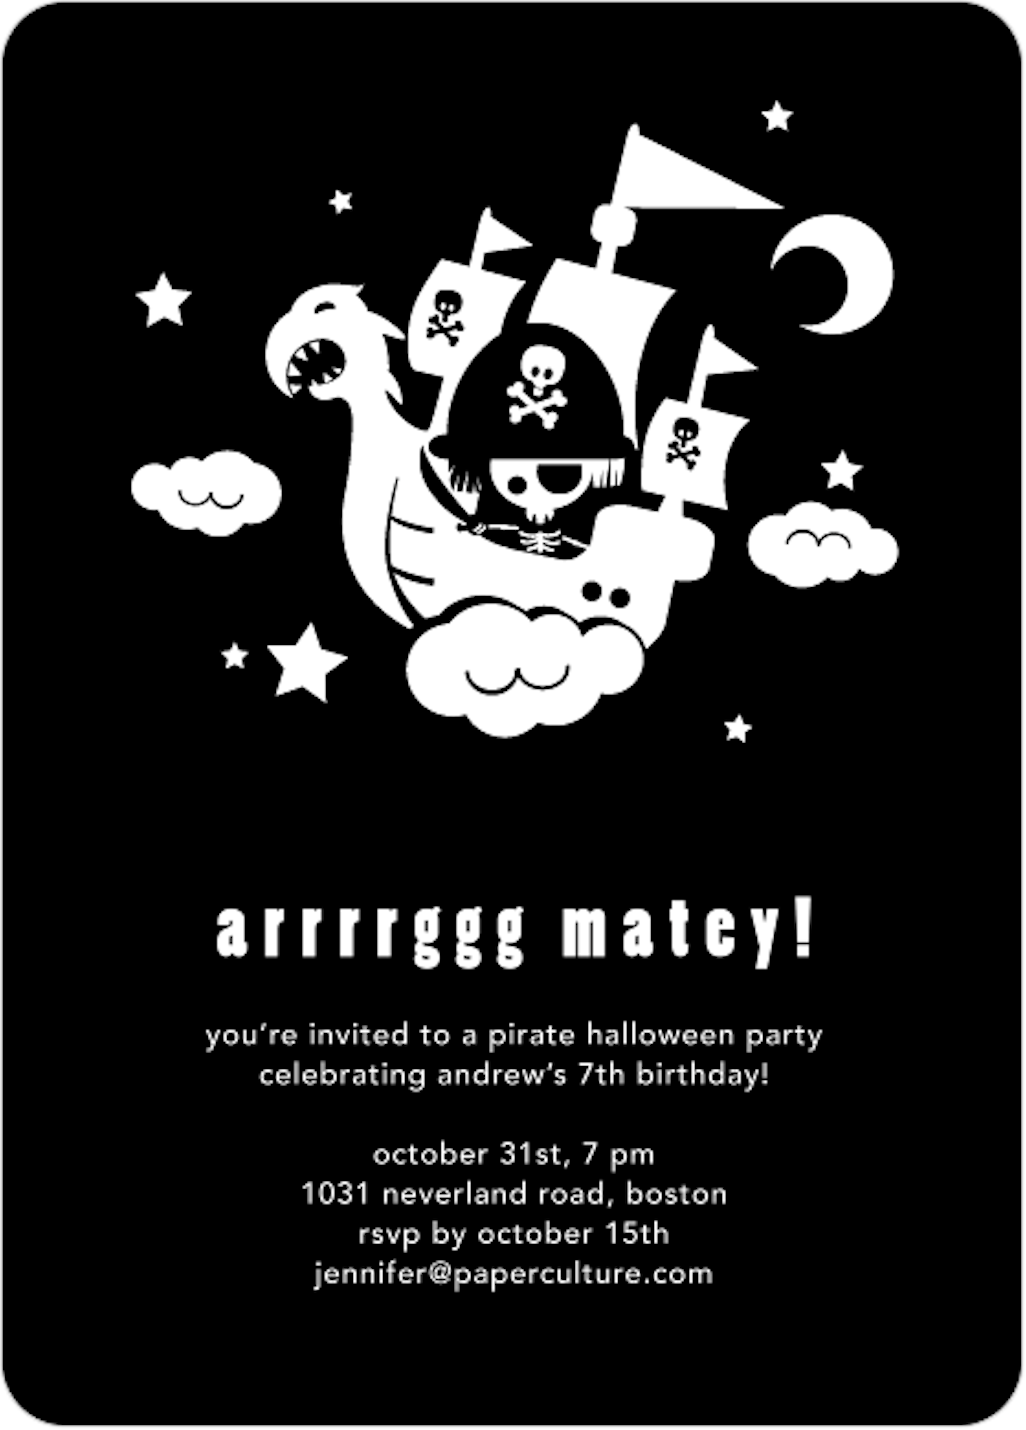 Flying Pirate Ship Halloween Party Invitations